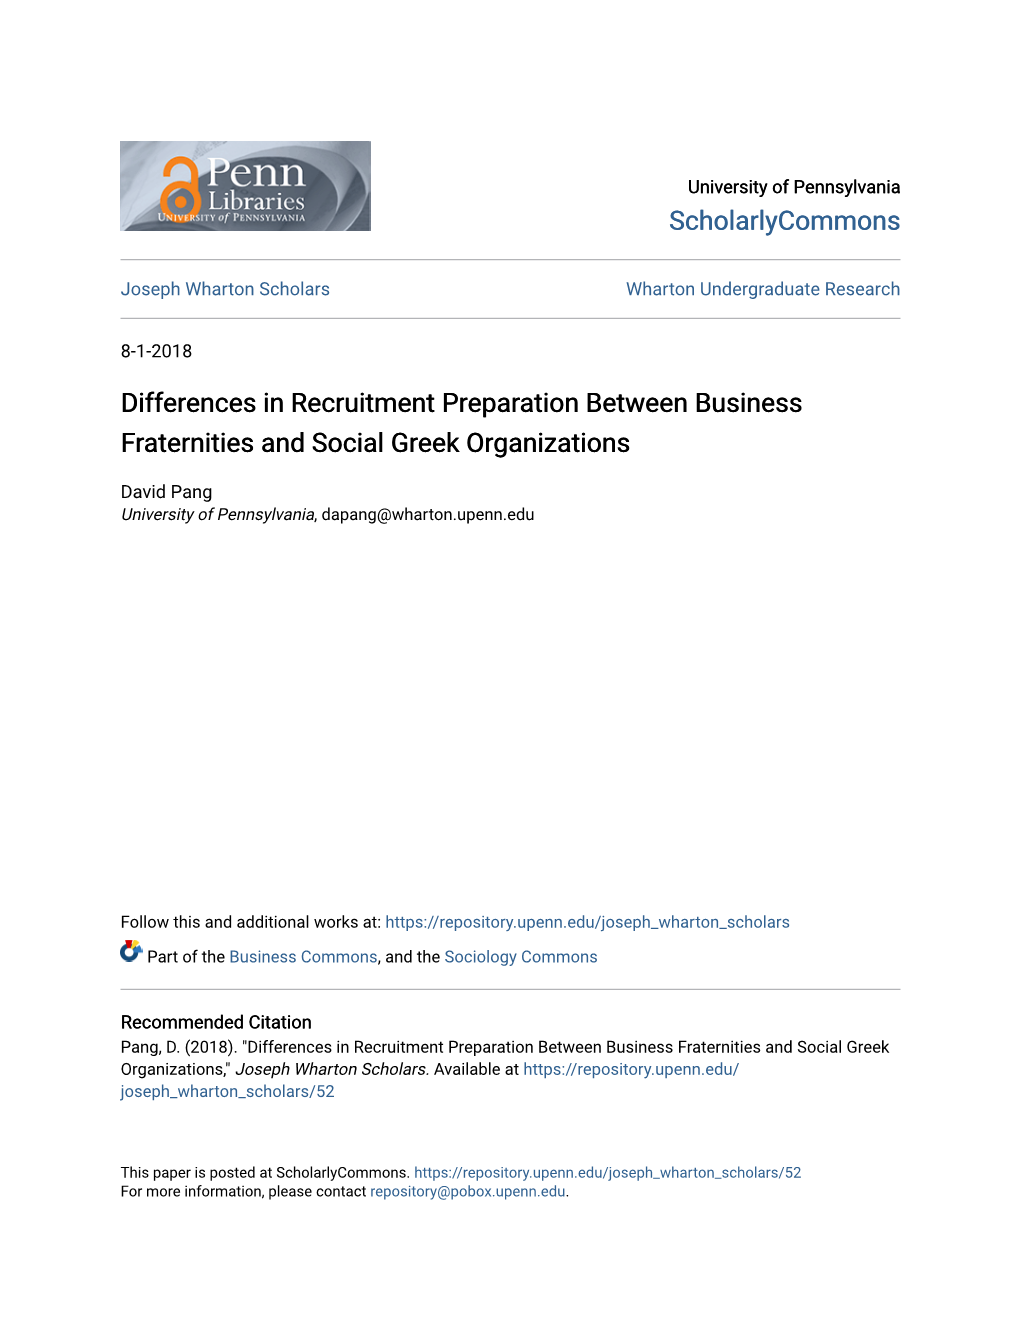 Differences in Recruitment Preparation Between Business Fraternities and Social Greek Organizations